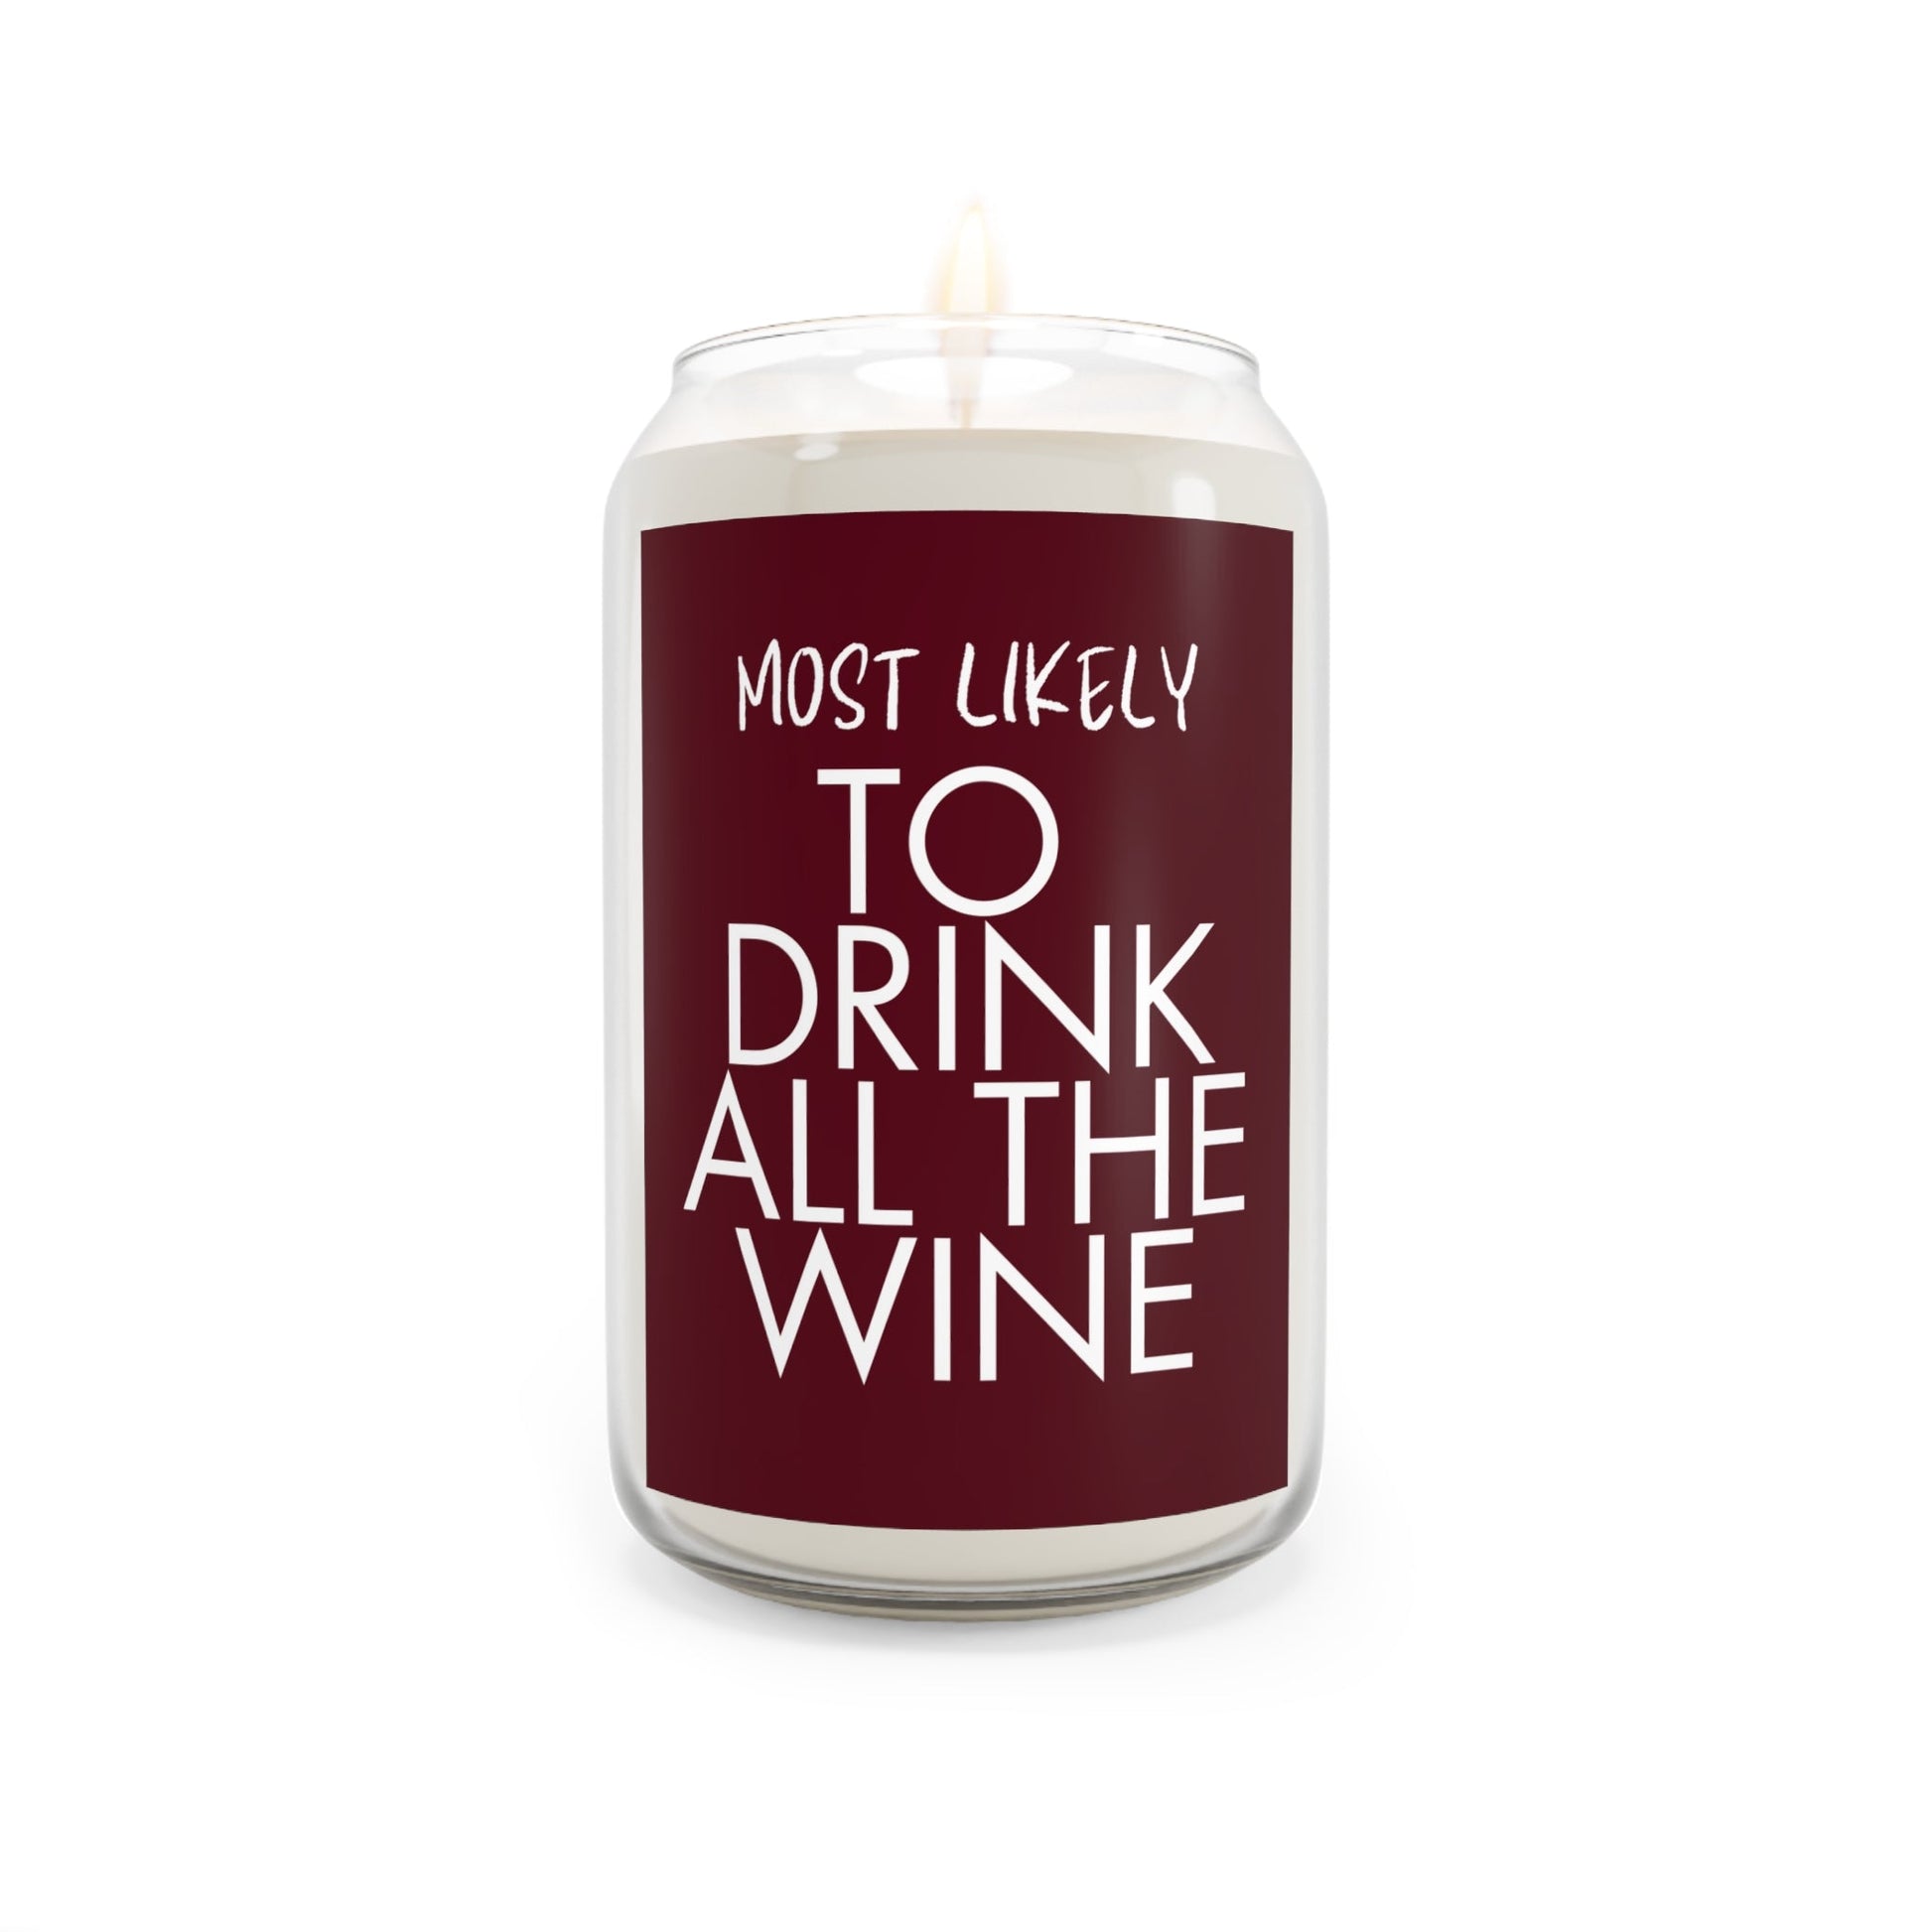 Drink All the Wine Candle - Comfort Spice / 13.75oz Home